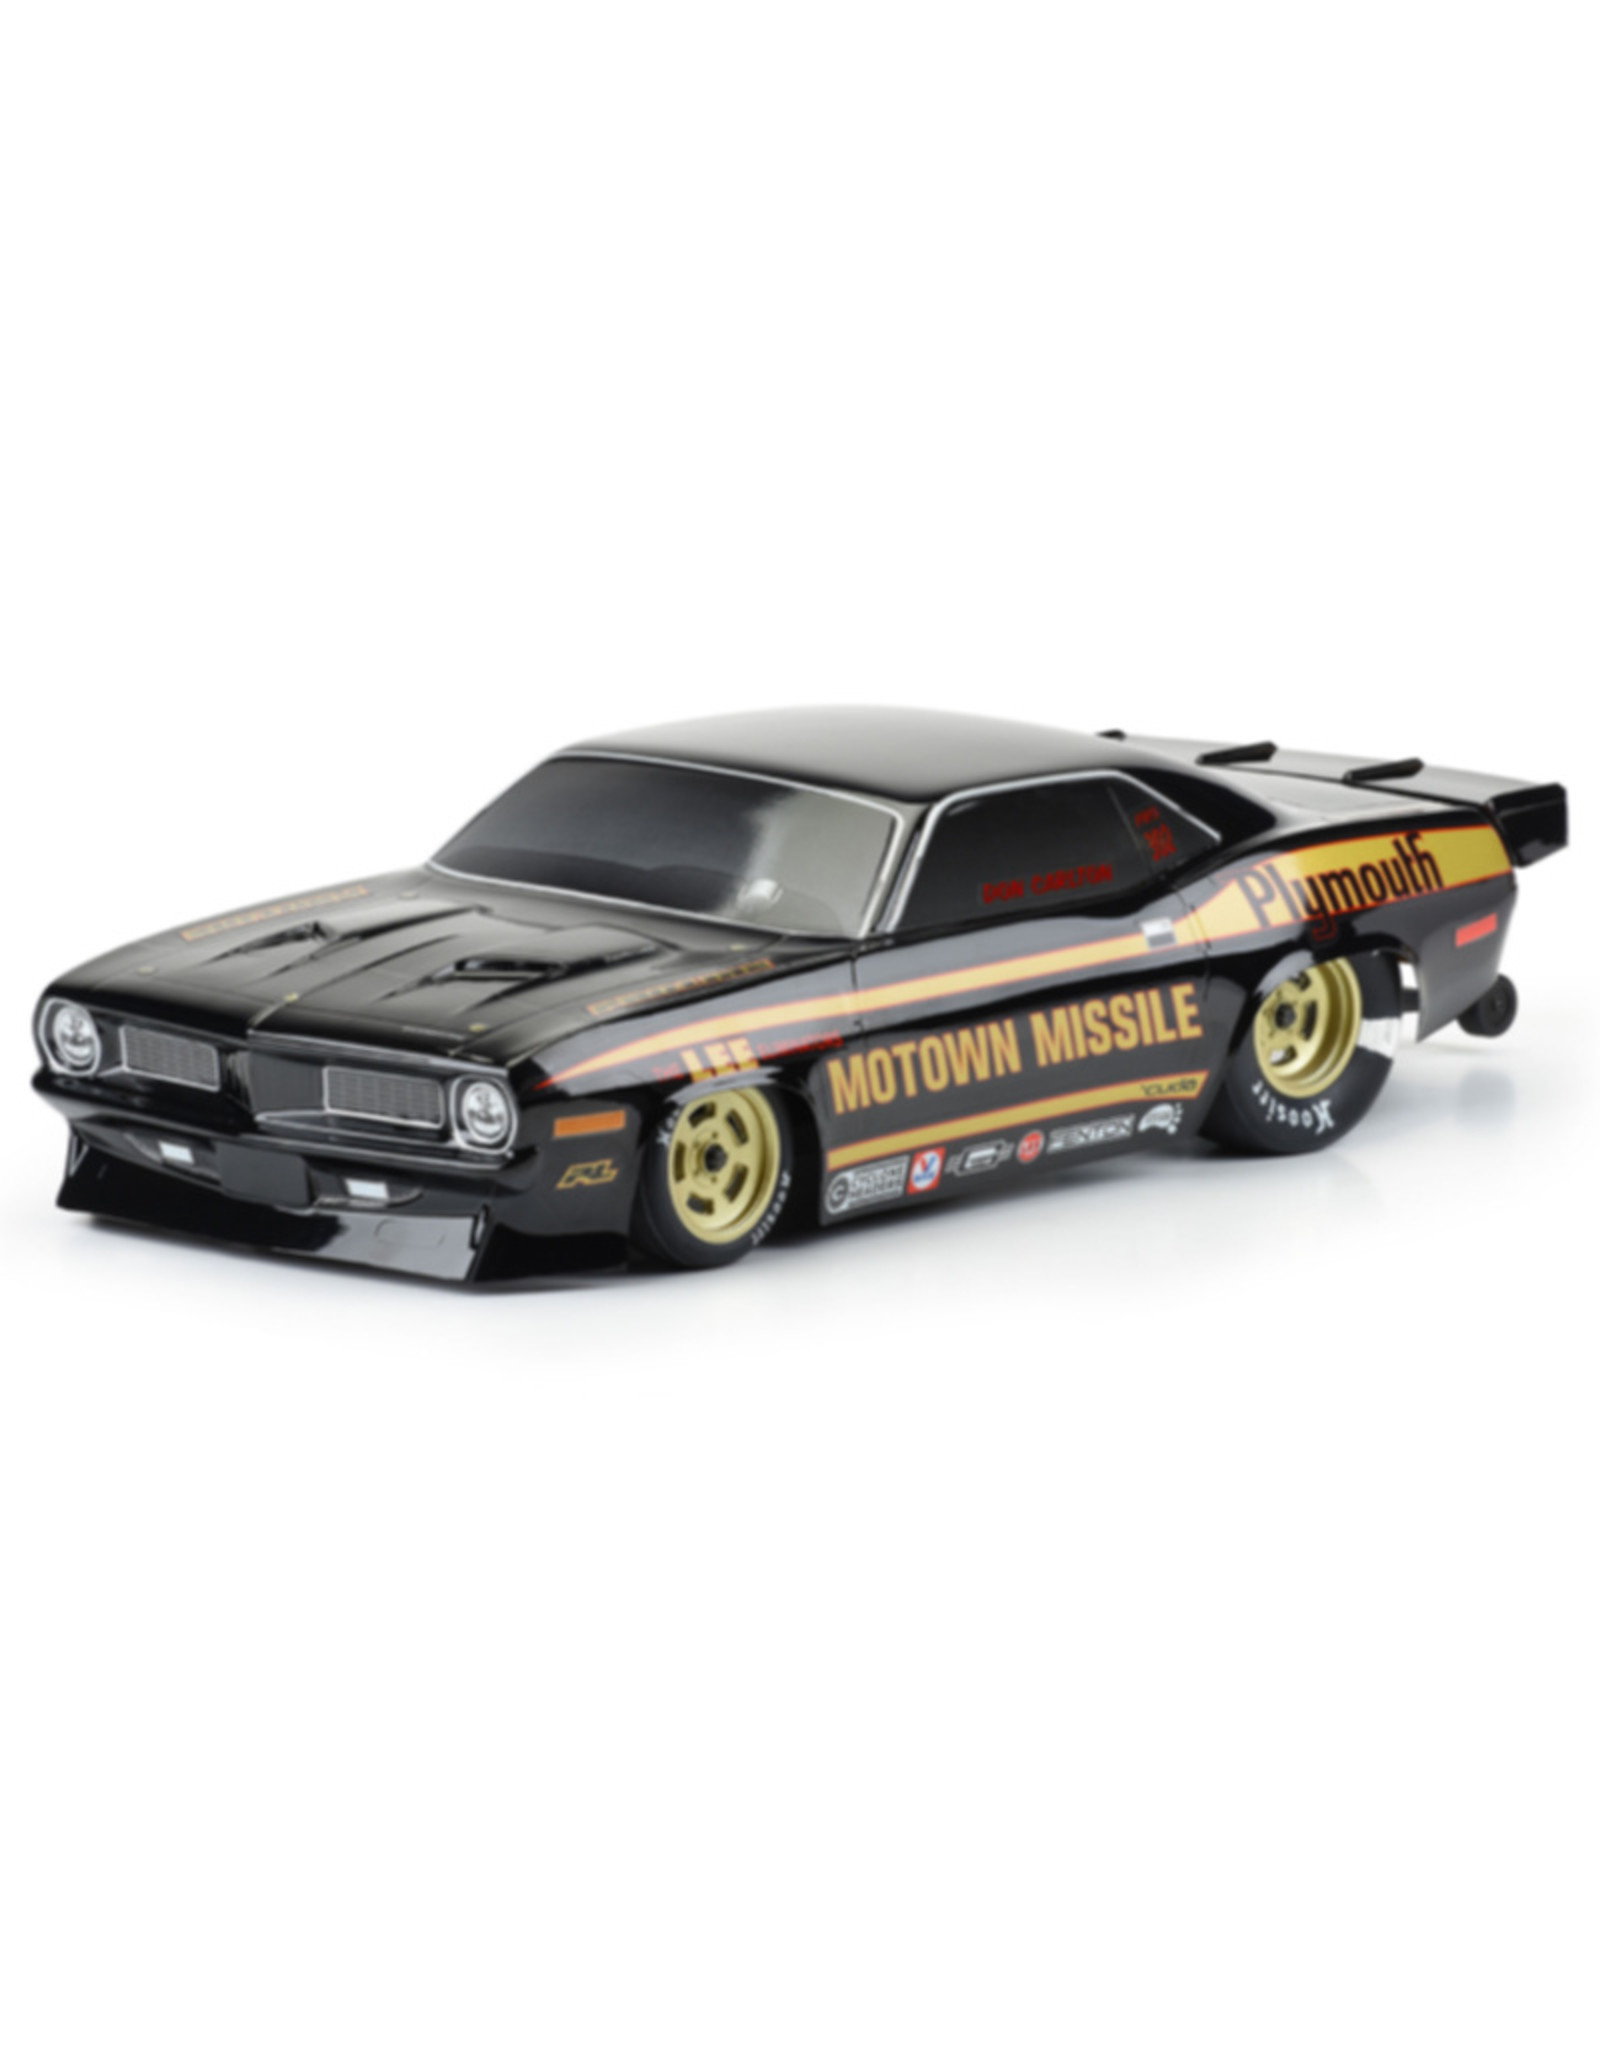 Pro-Line Racing PRO355018  1/10 1972 Plymouth Barracuda Motown Missile Black Body: Drag Car